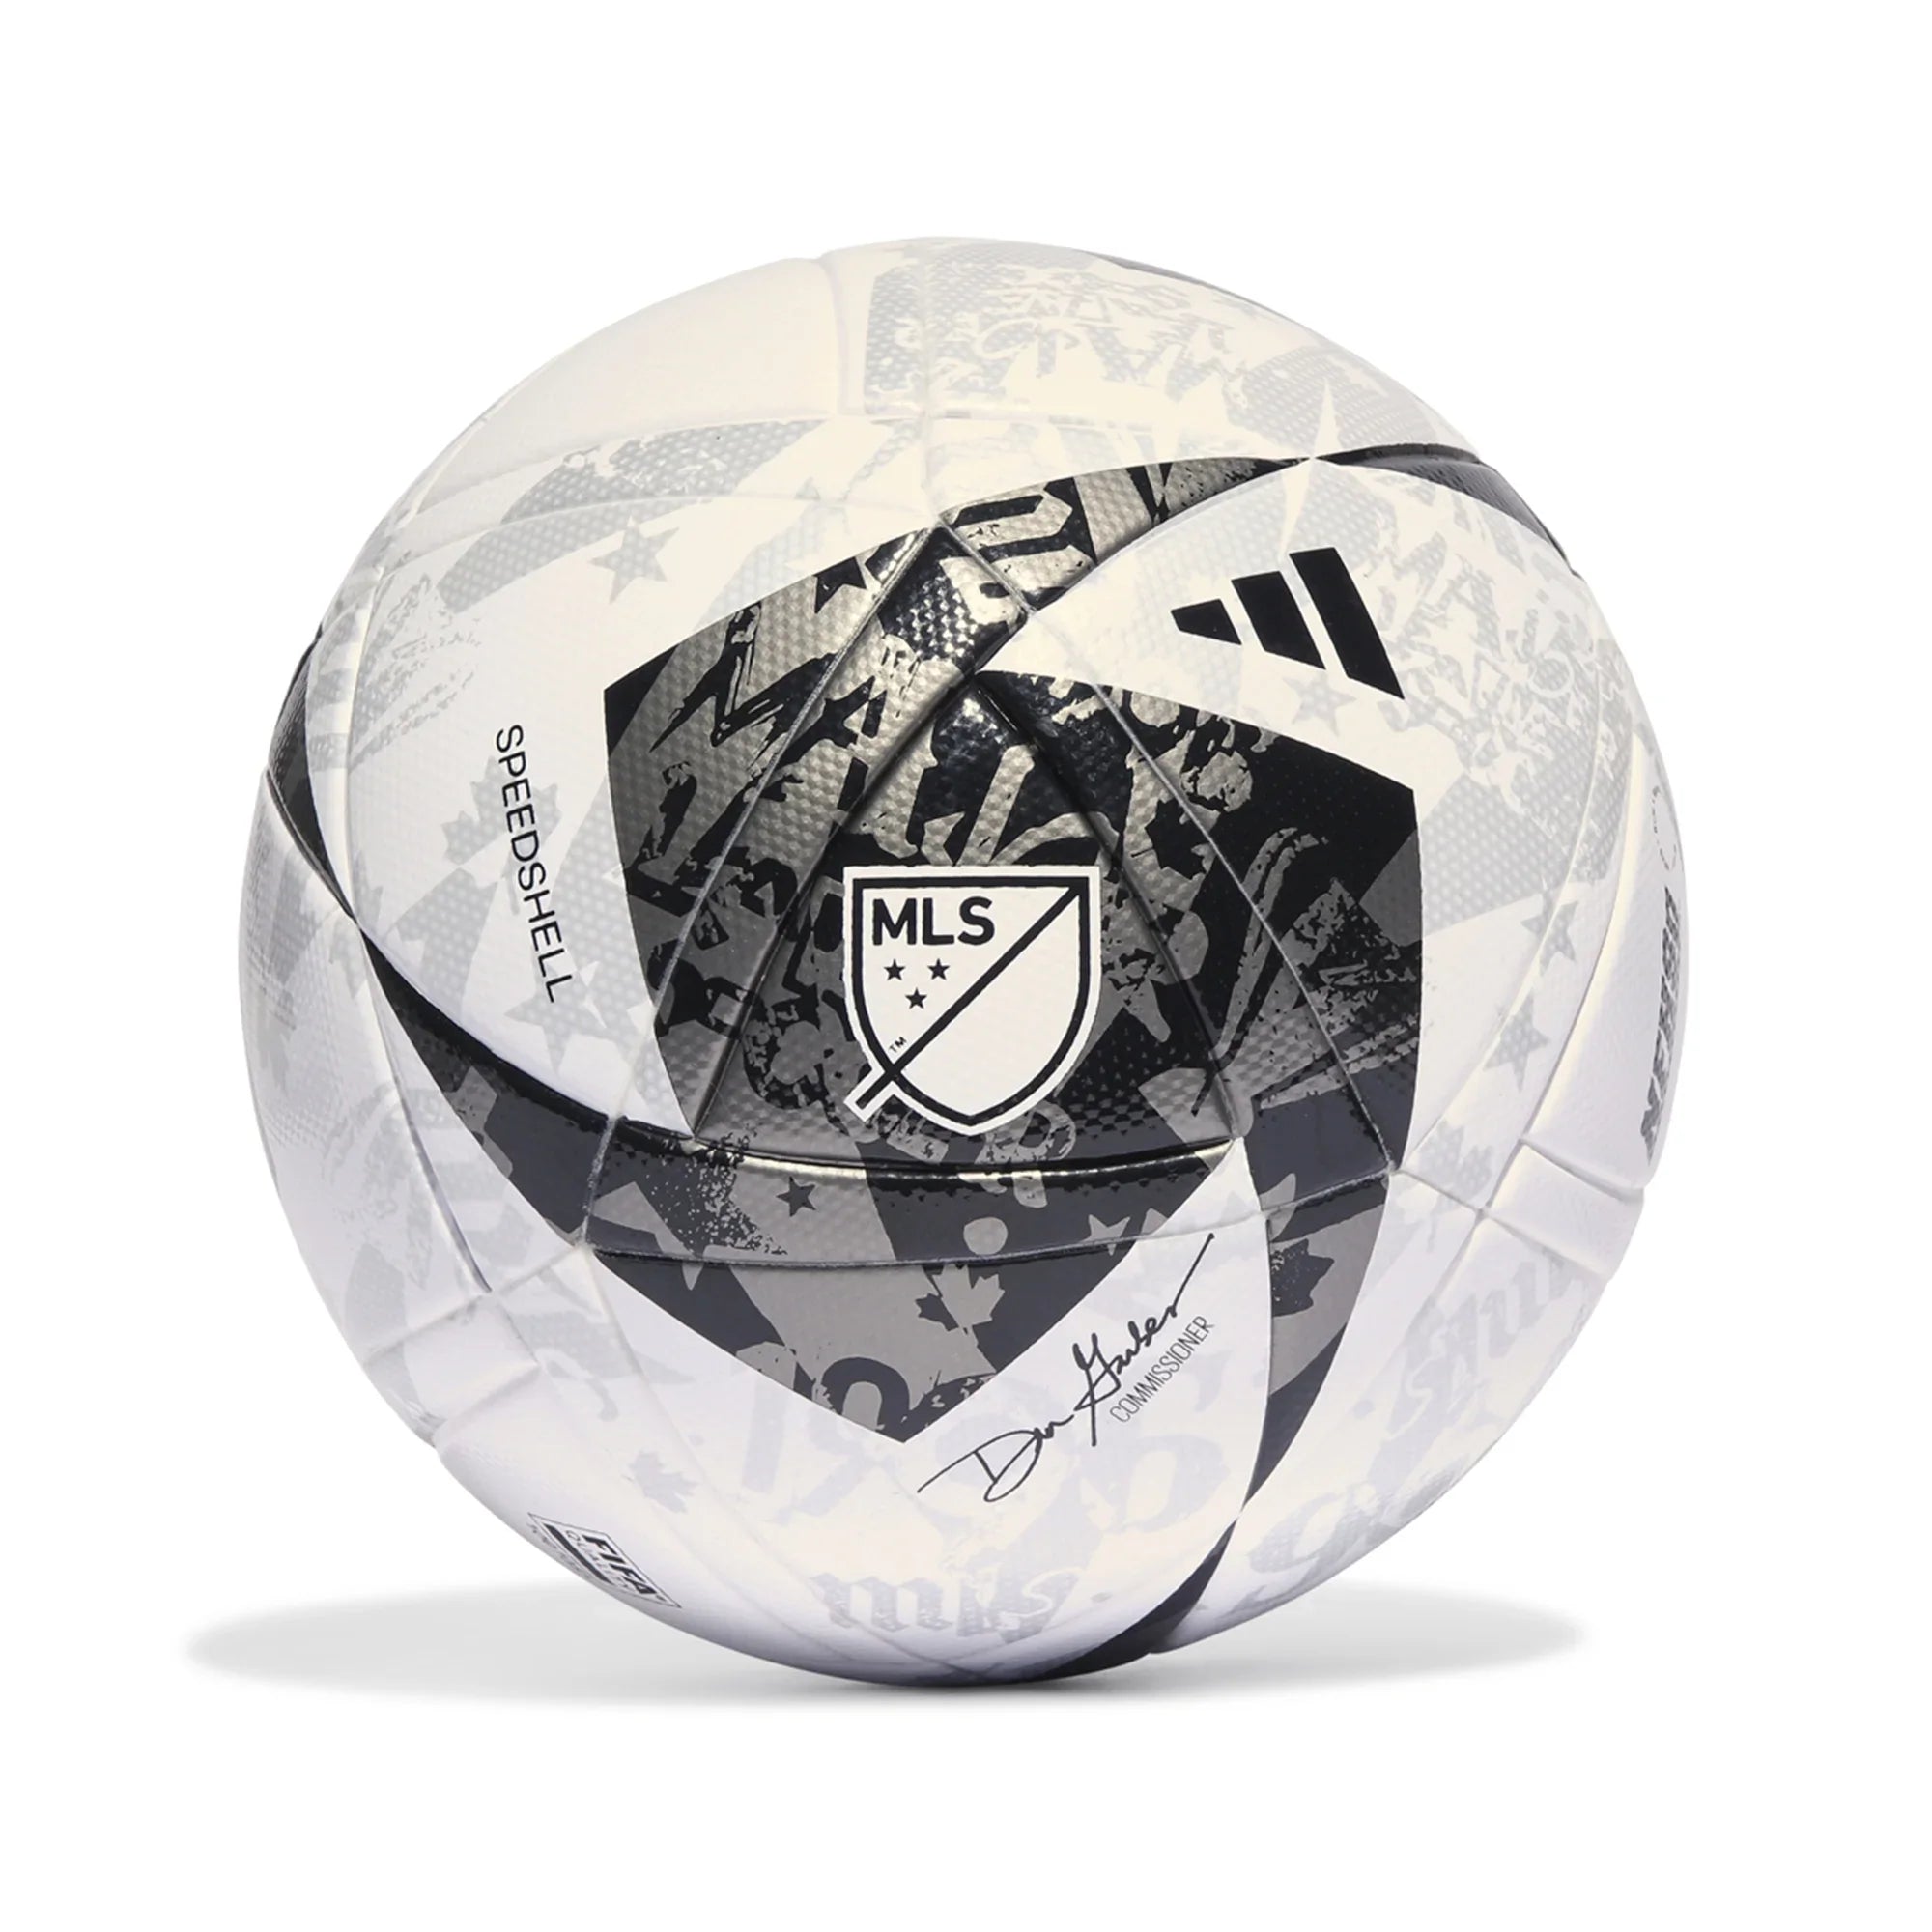 On Sale Now, Union's 2023 adidas One Planet Kit